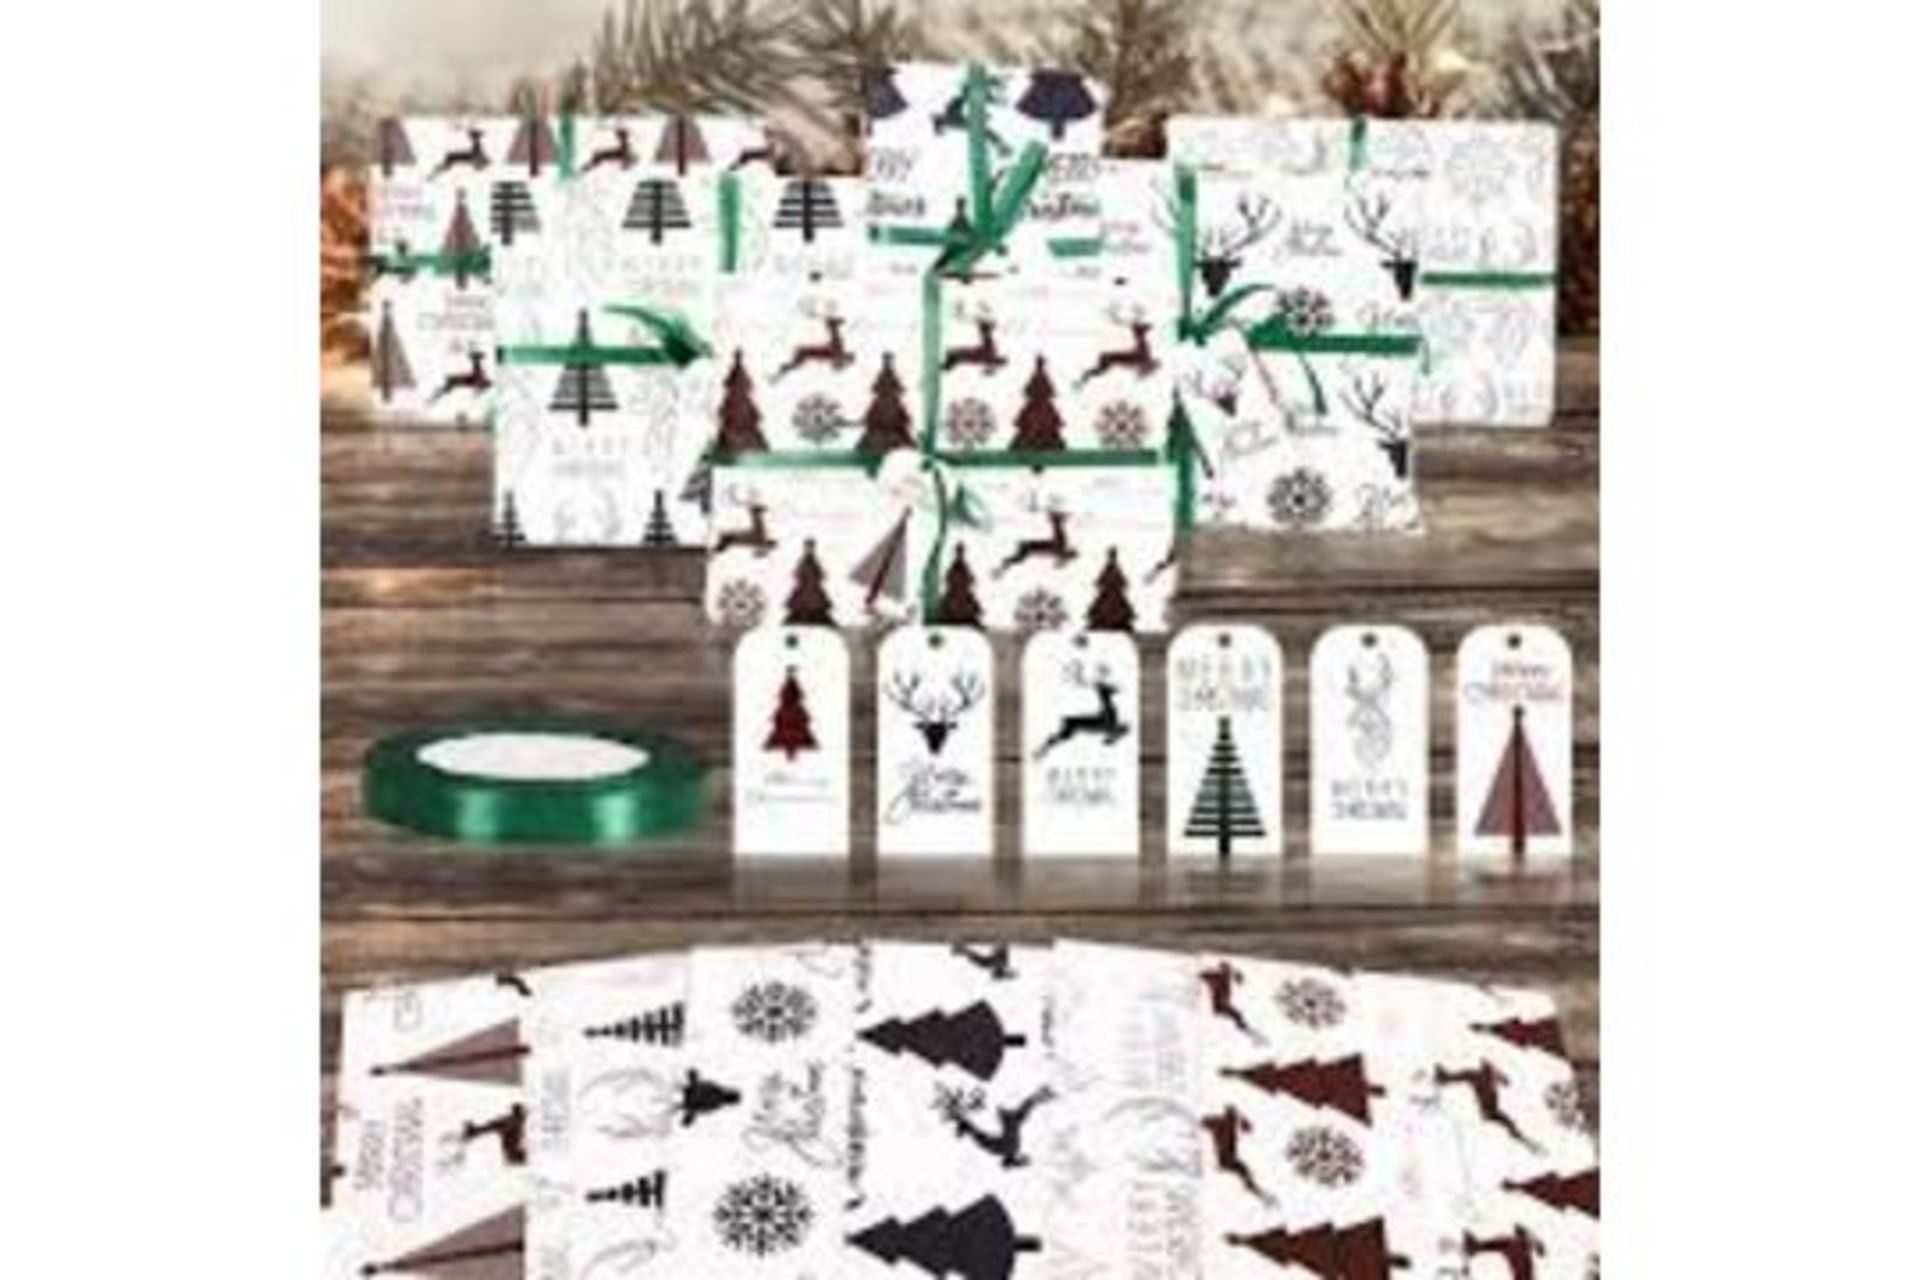 TRADE LOT 300 X BRAND NEW ASSORTED SETS OF 6 FOLDED SHEETS LUXURY CHRISTMAS WRAPPING PAPER SETS IN - Image 3 of 4